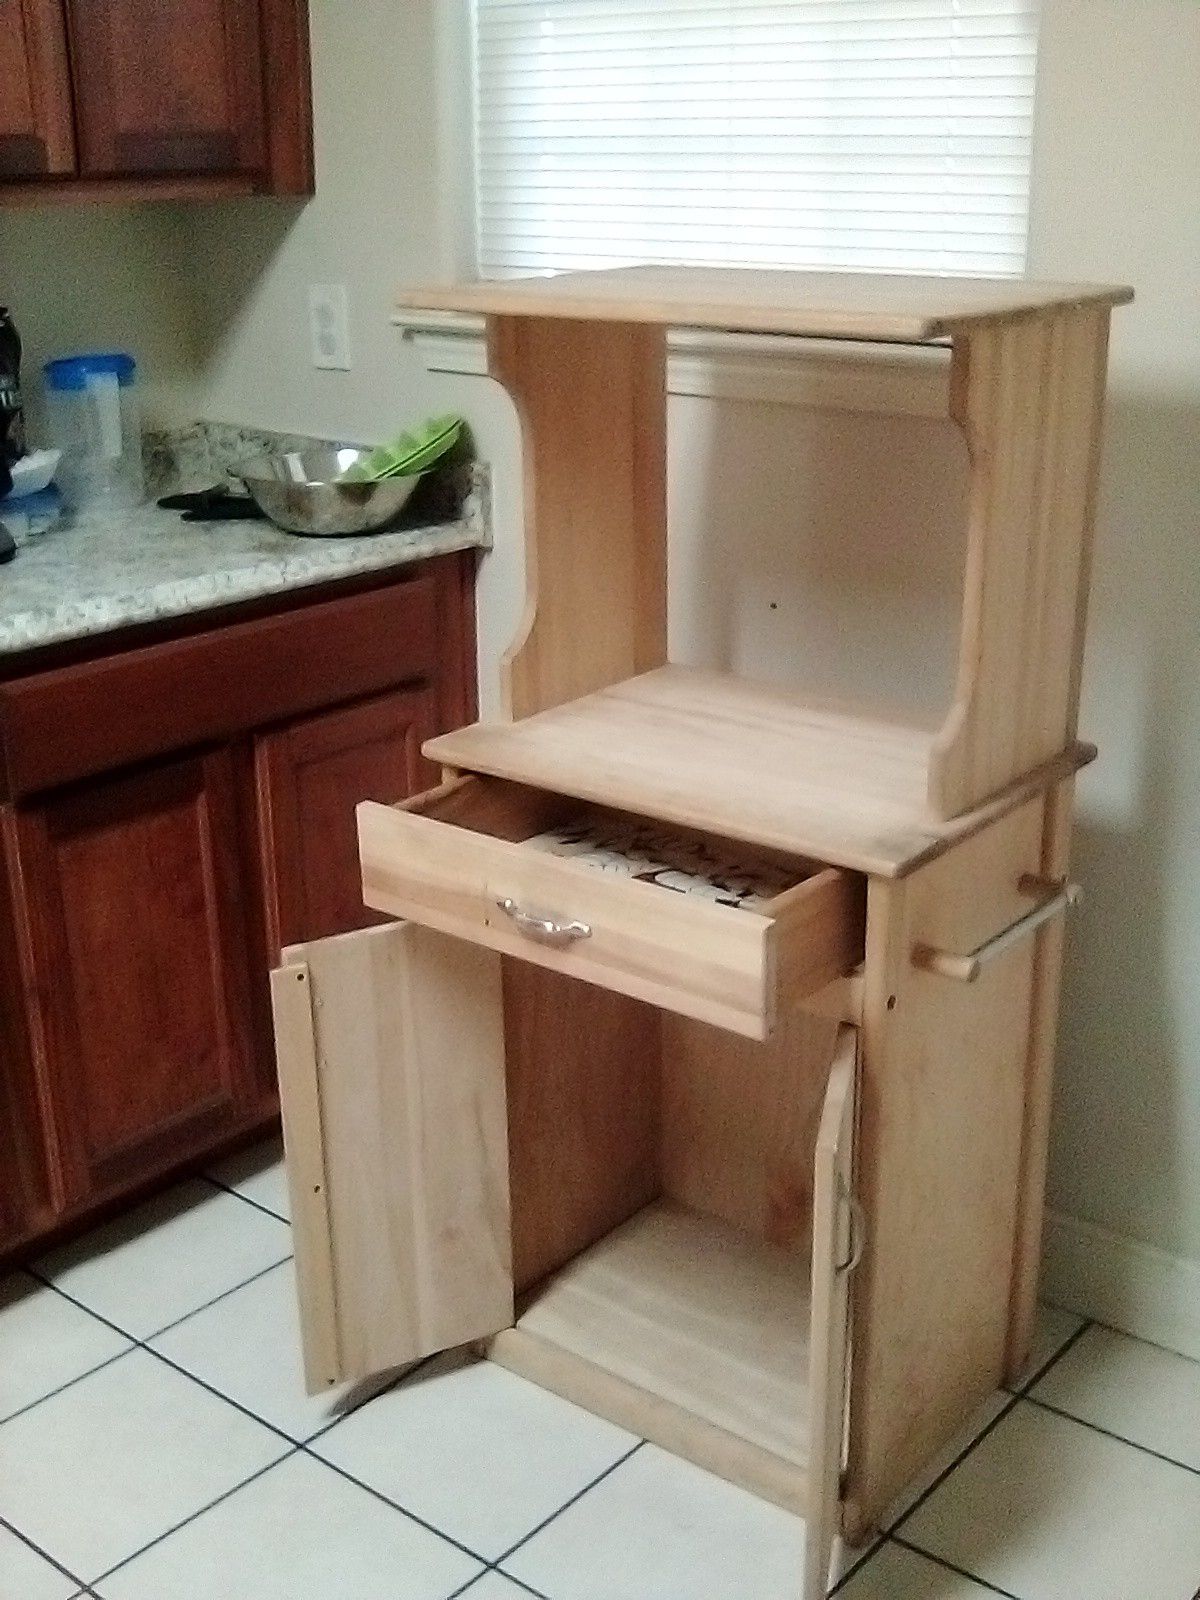 Kitchen microwave stand cabinet